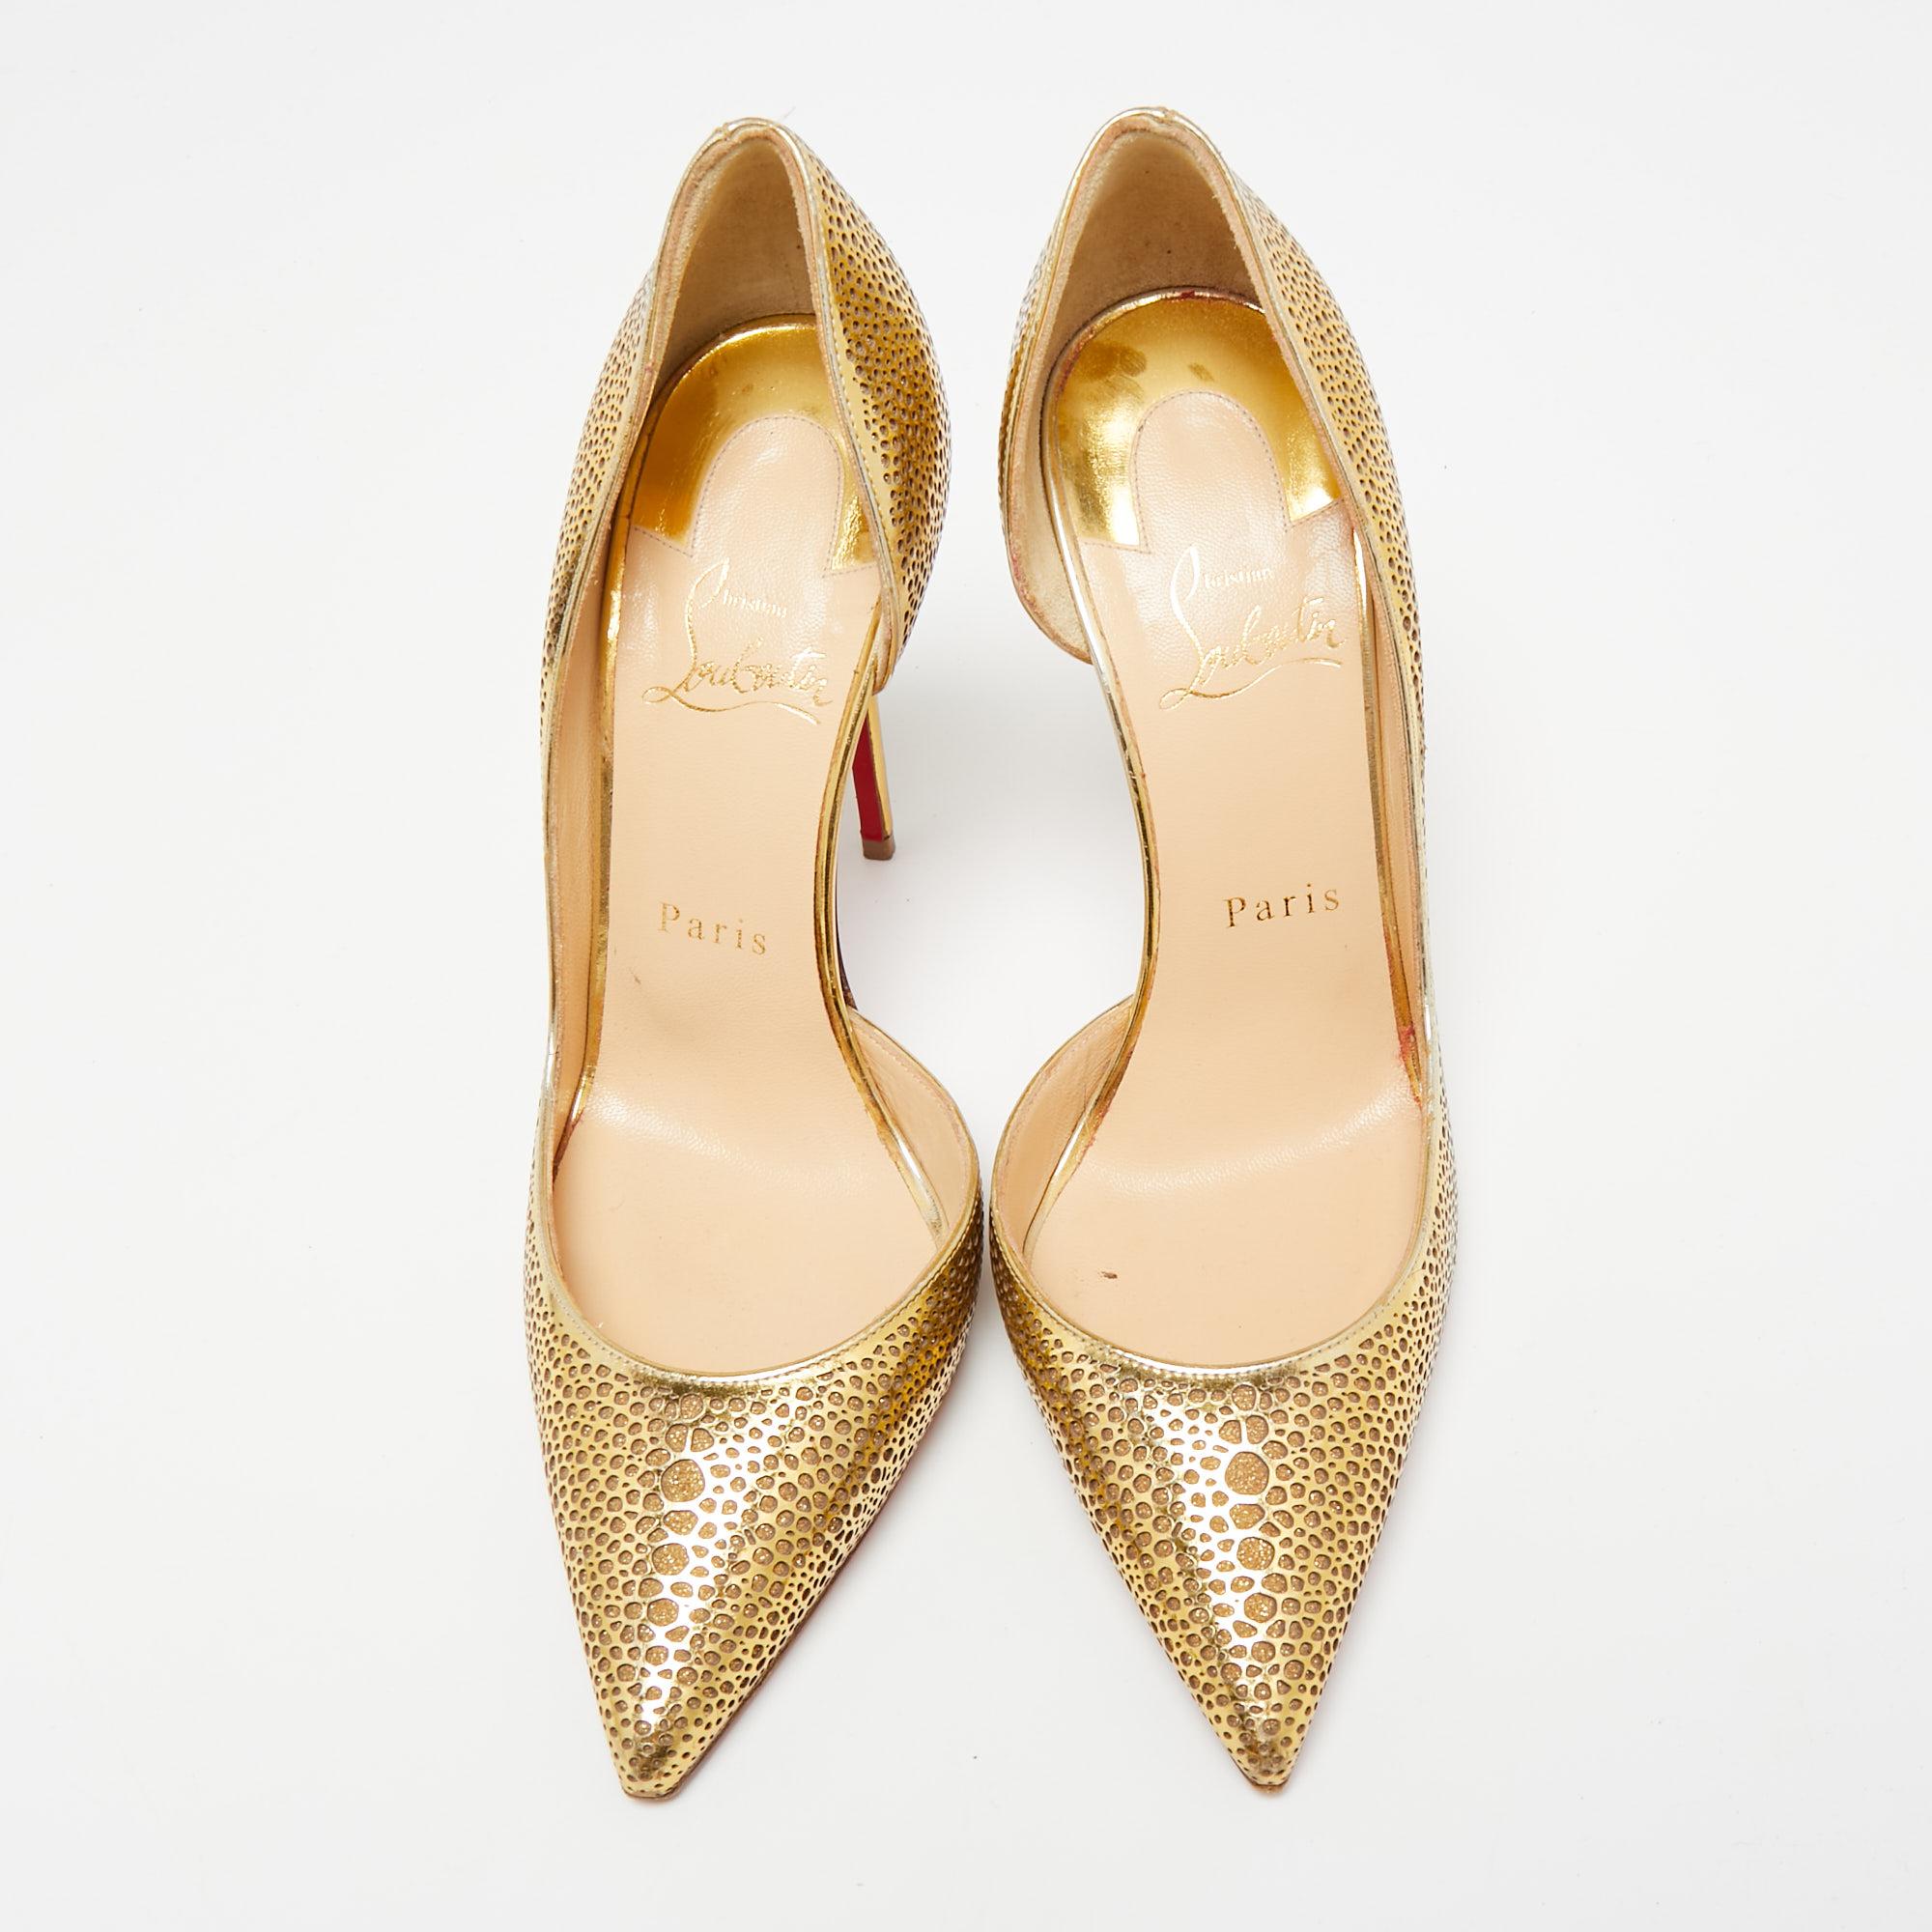 Christian Louboutin Laser Cut Leather and Glitter Galu D'orsay Pumps Size 37 In Good Condition In Dubai, Al Qouz 2